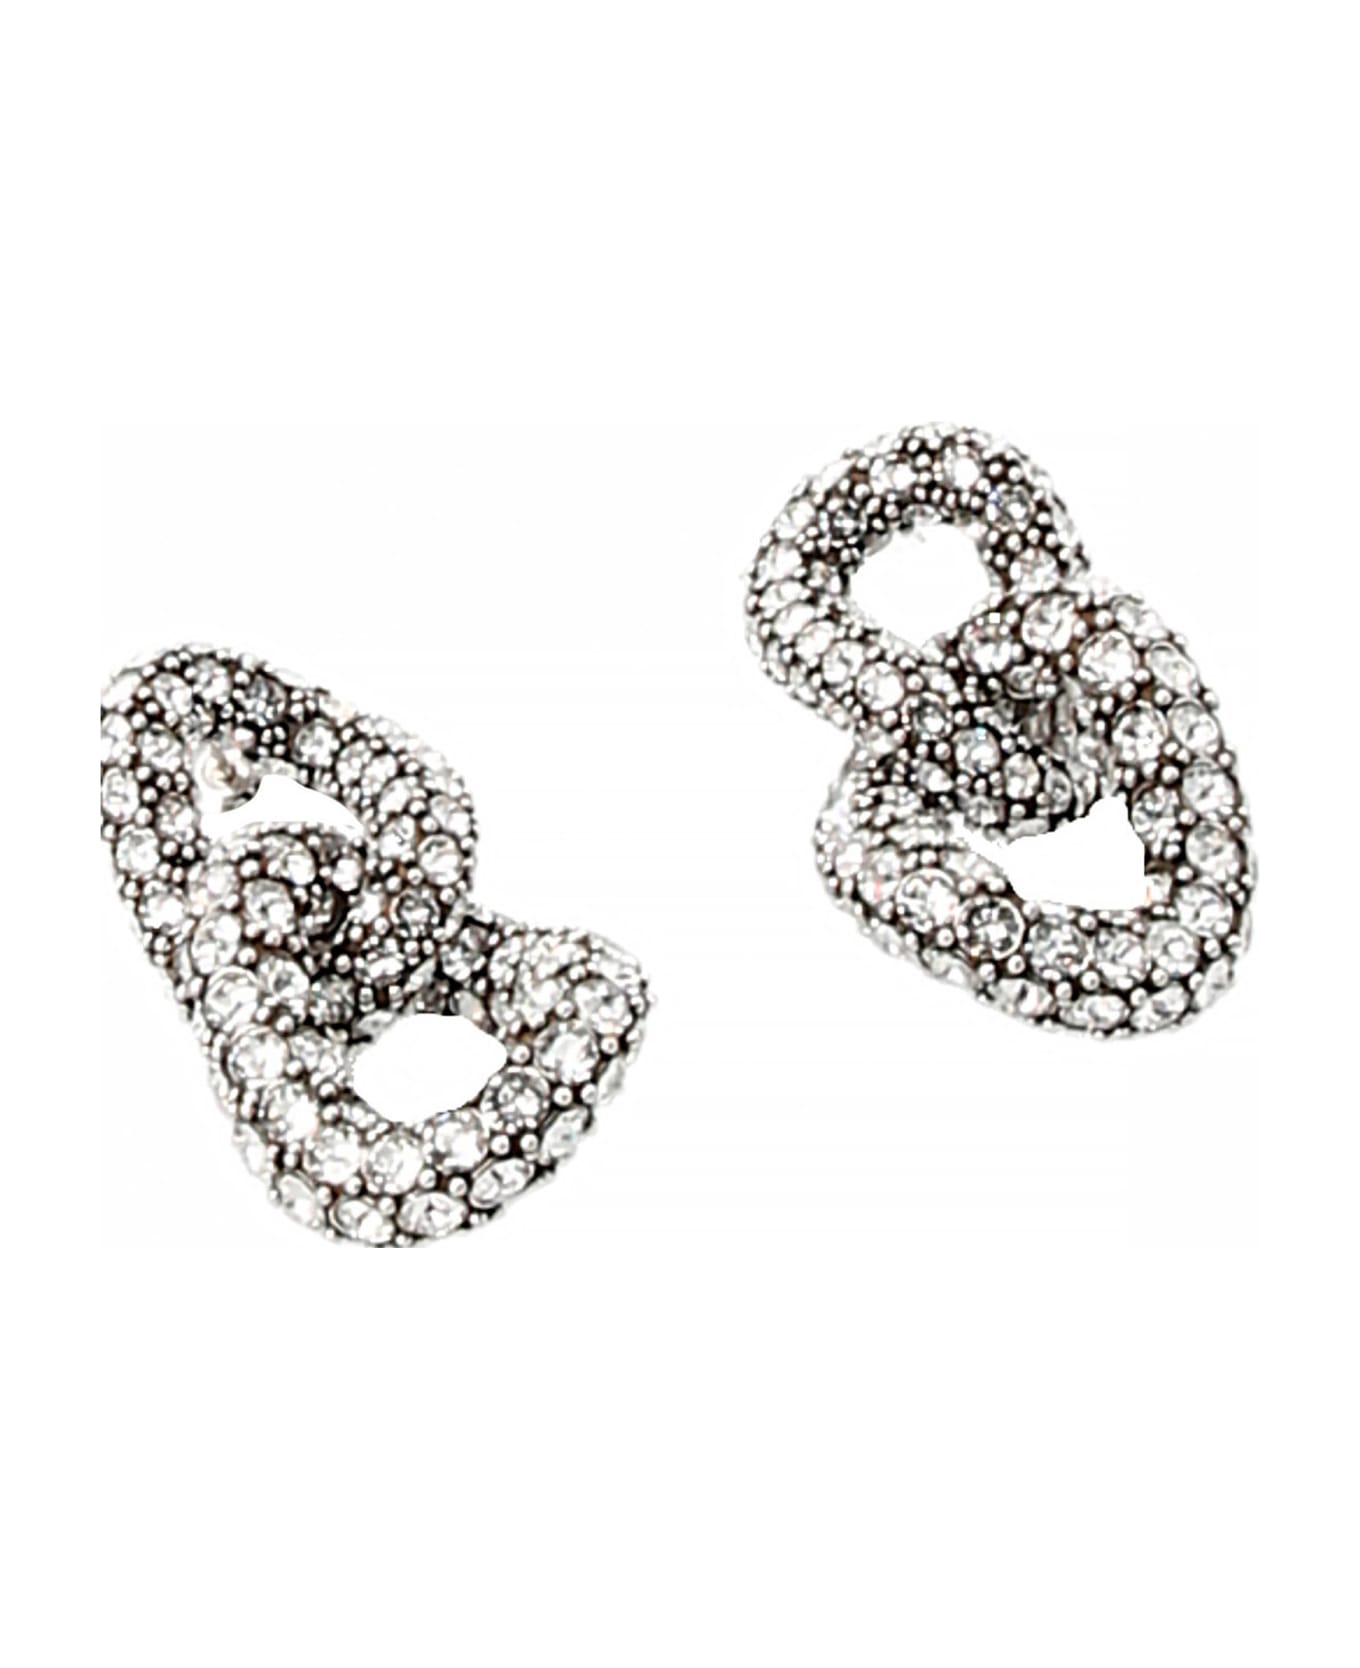 Isabel Marant Crystal Earrings - Silver ジュエリー